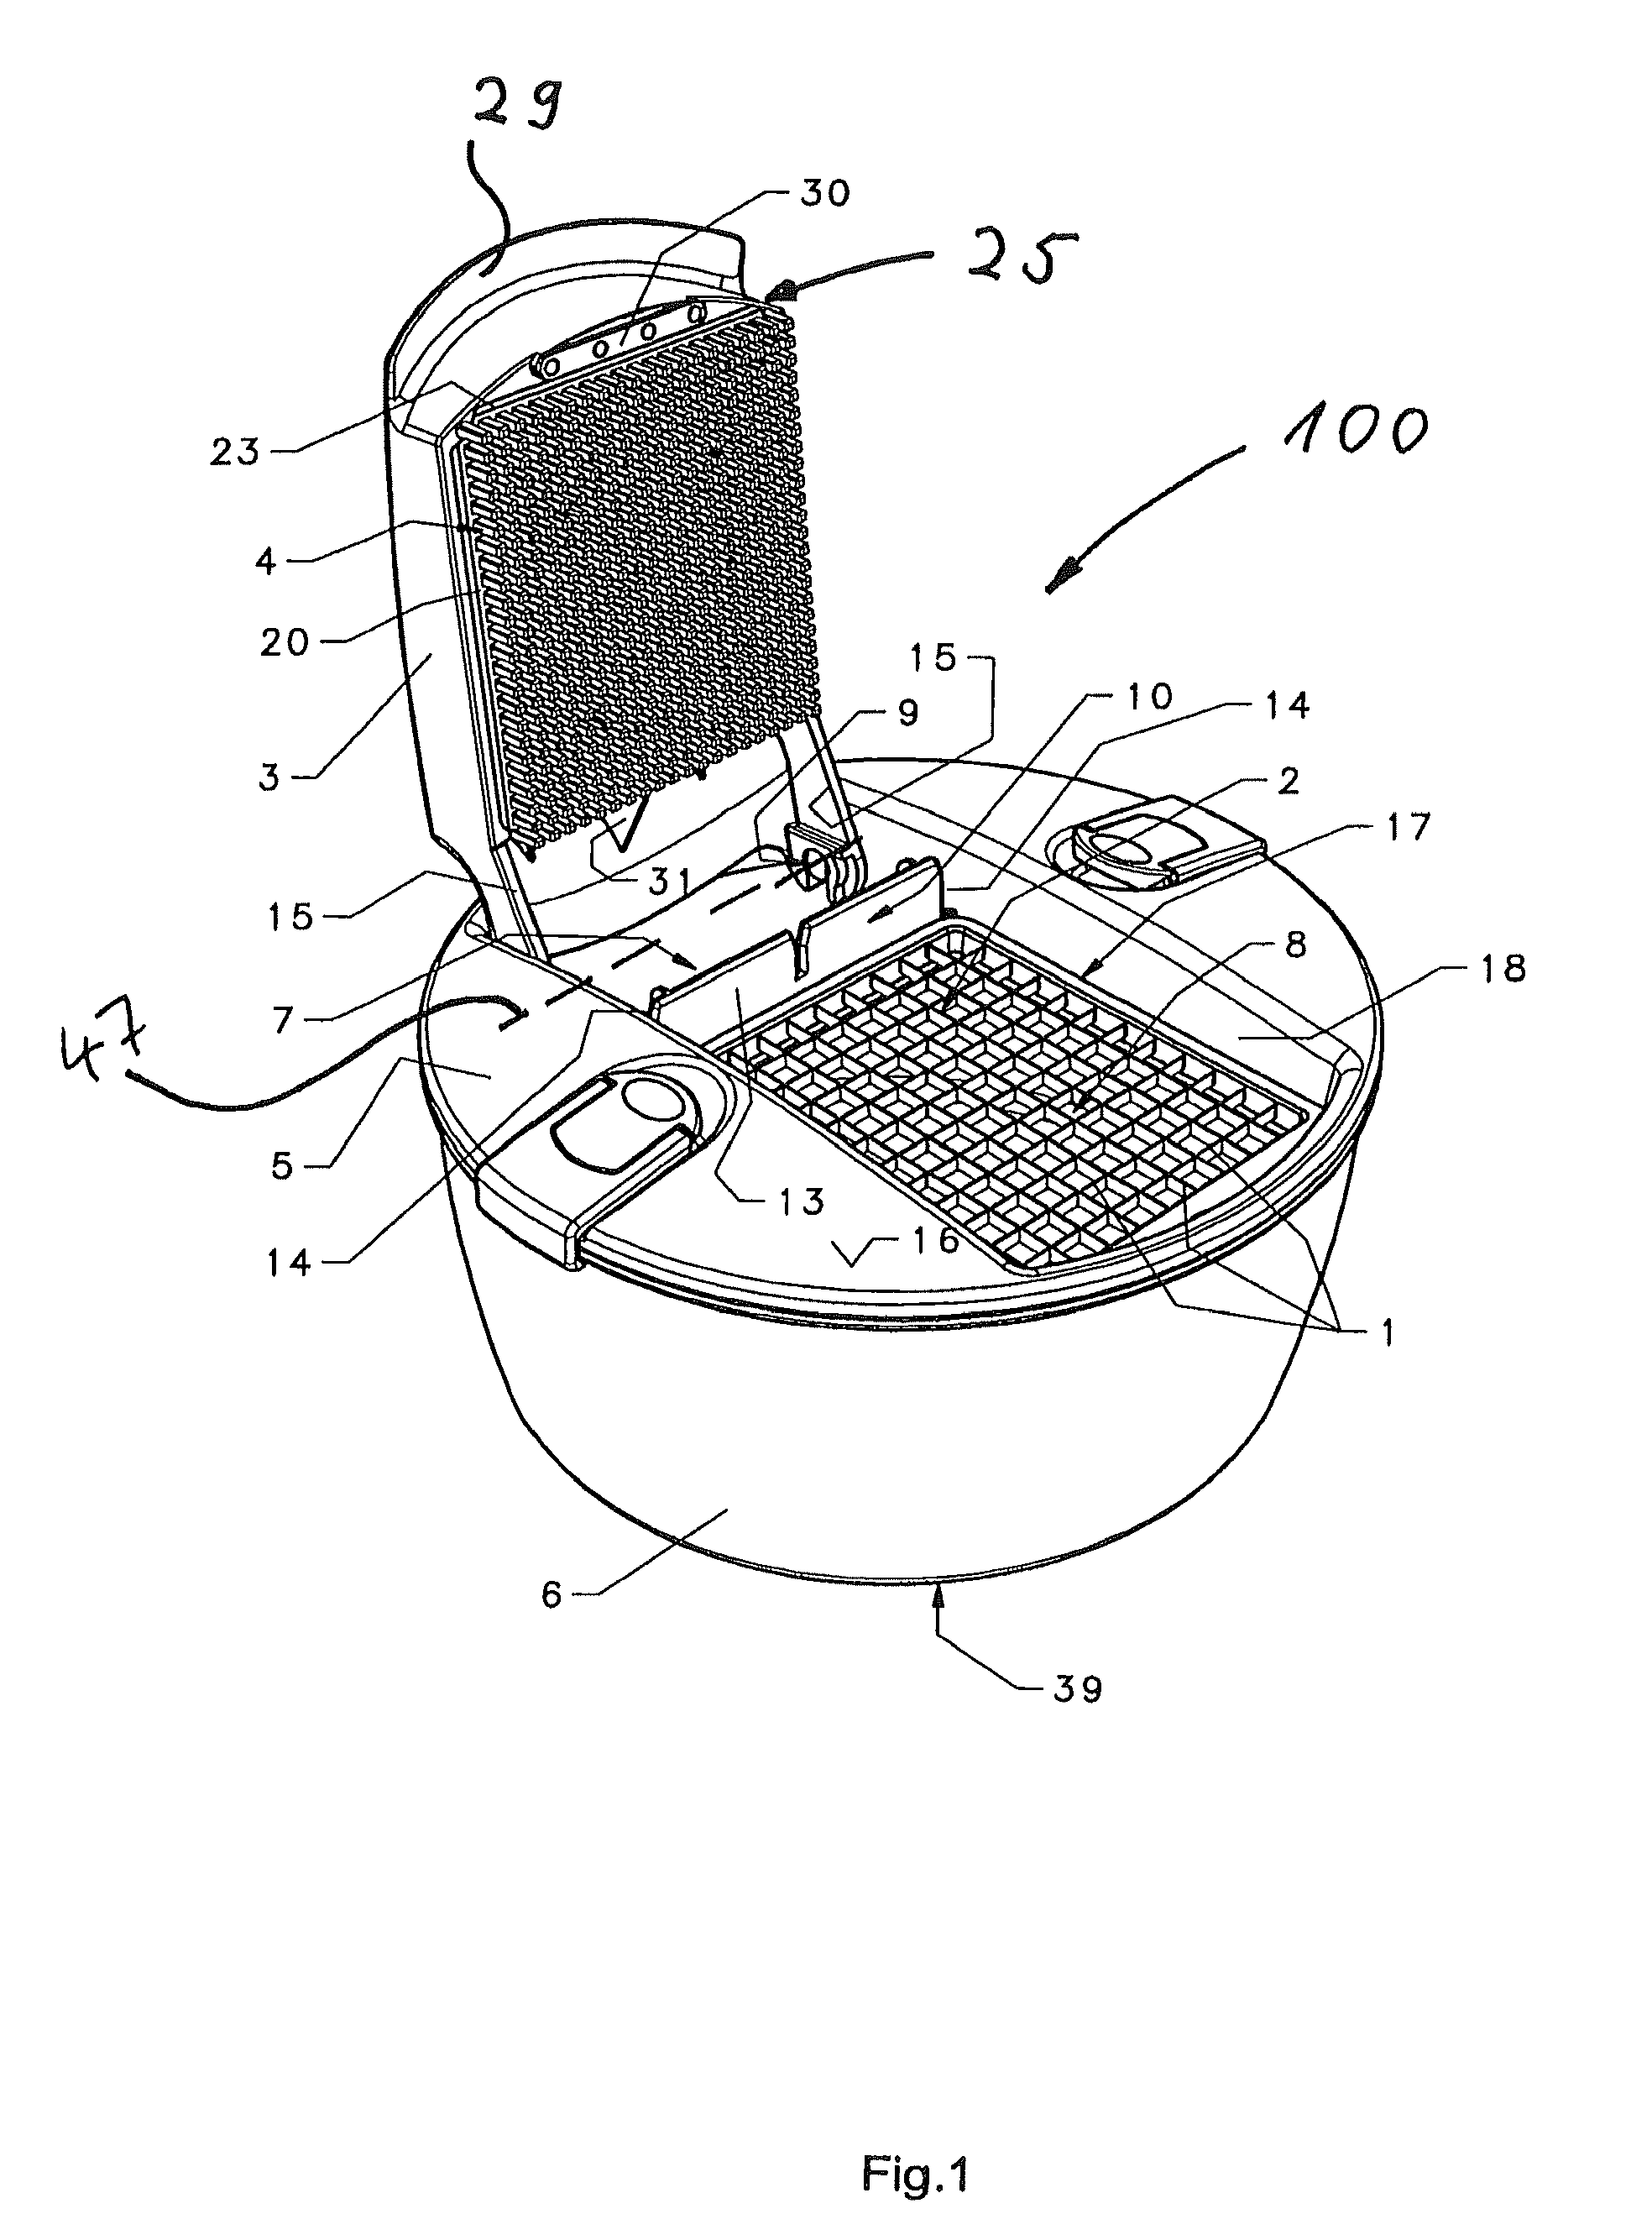 Device for cutting food and multi-functional device for the kitchen